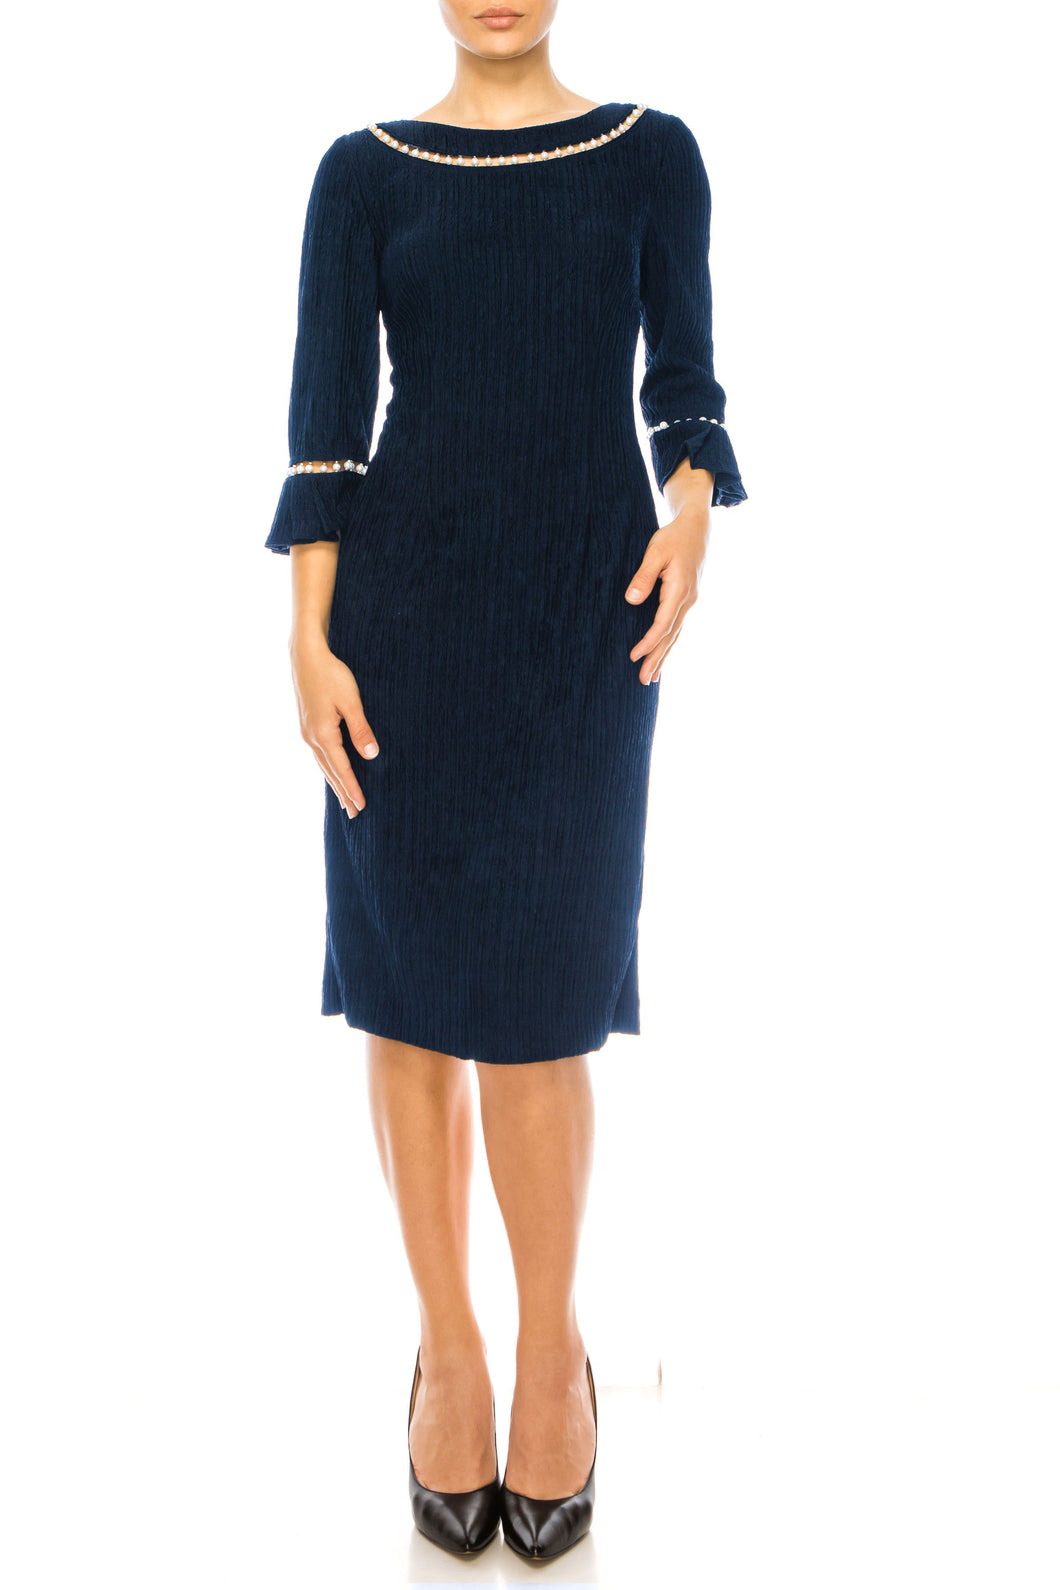 Brianna Milay Pearl Enhanced Navy Day Dress Women's Apparel Evening, Office, Classic